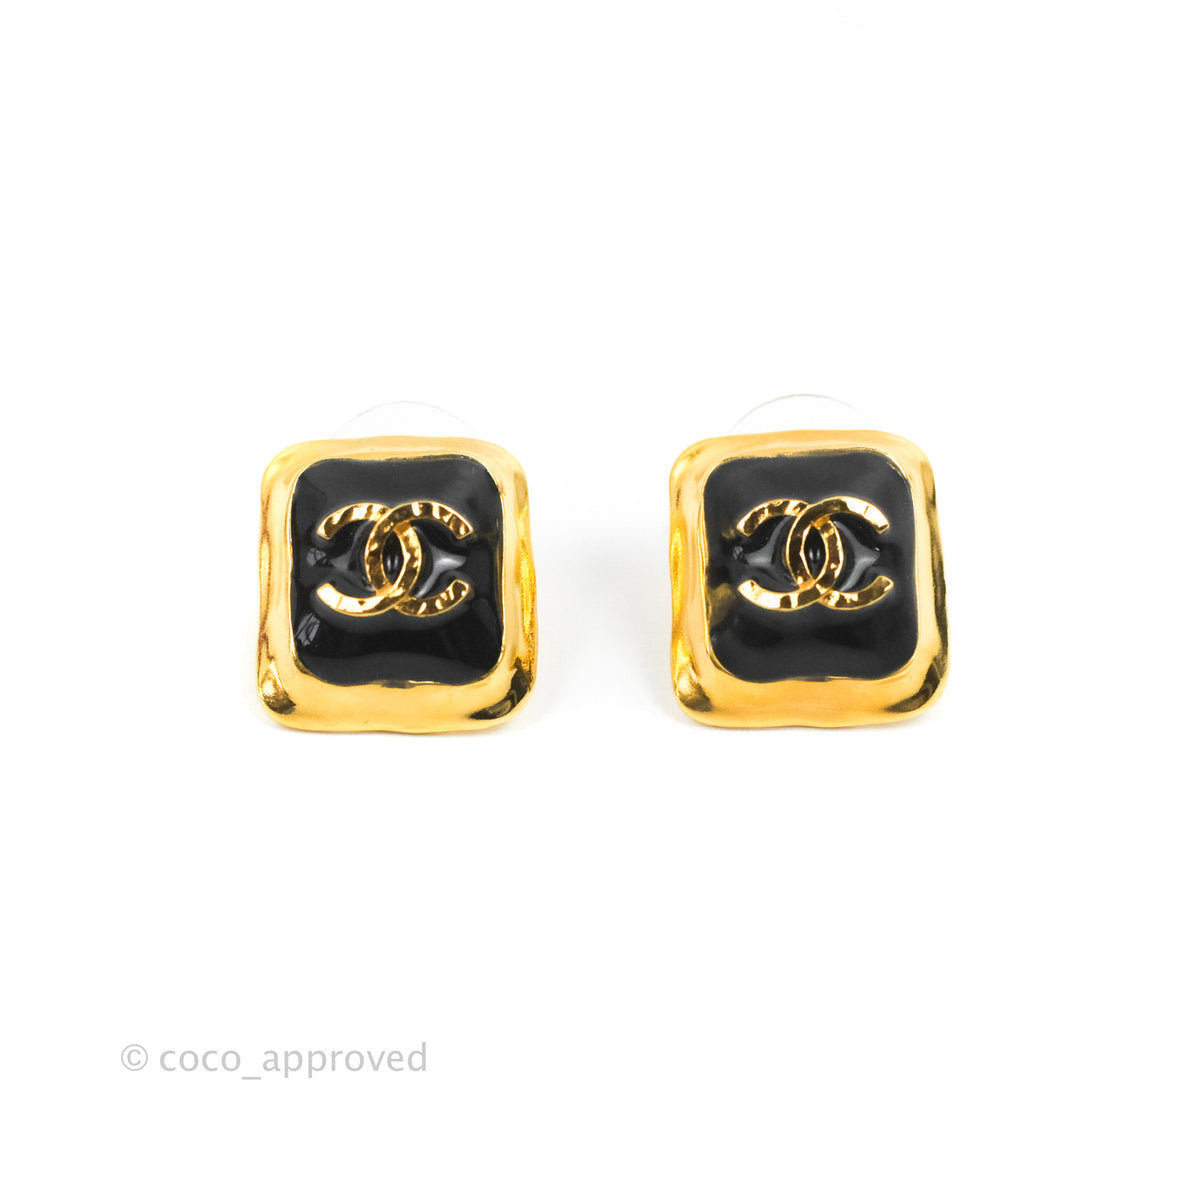 Black Leather and Gold Metal Square CC Earrings